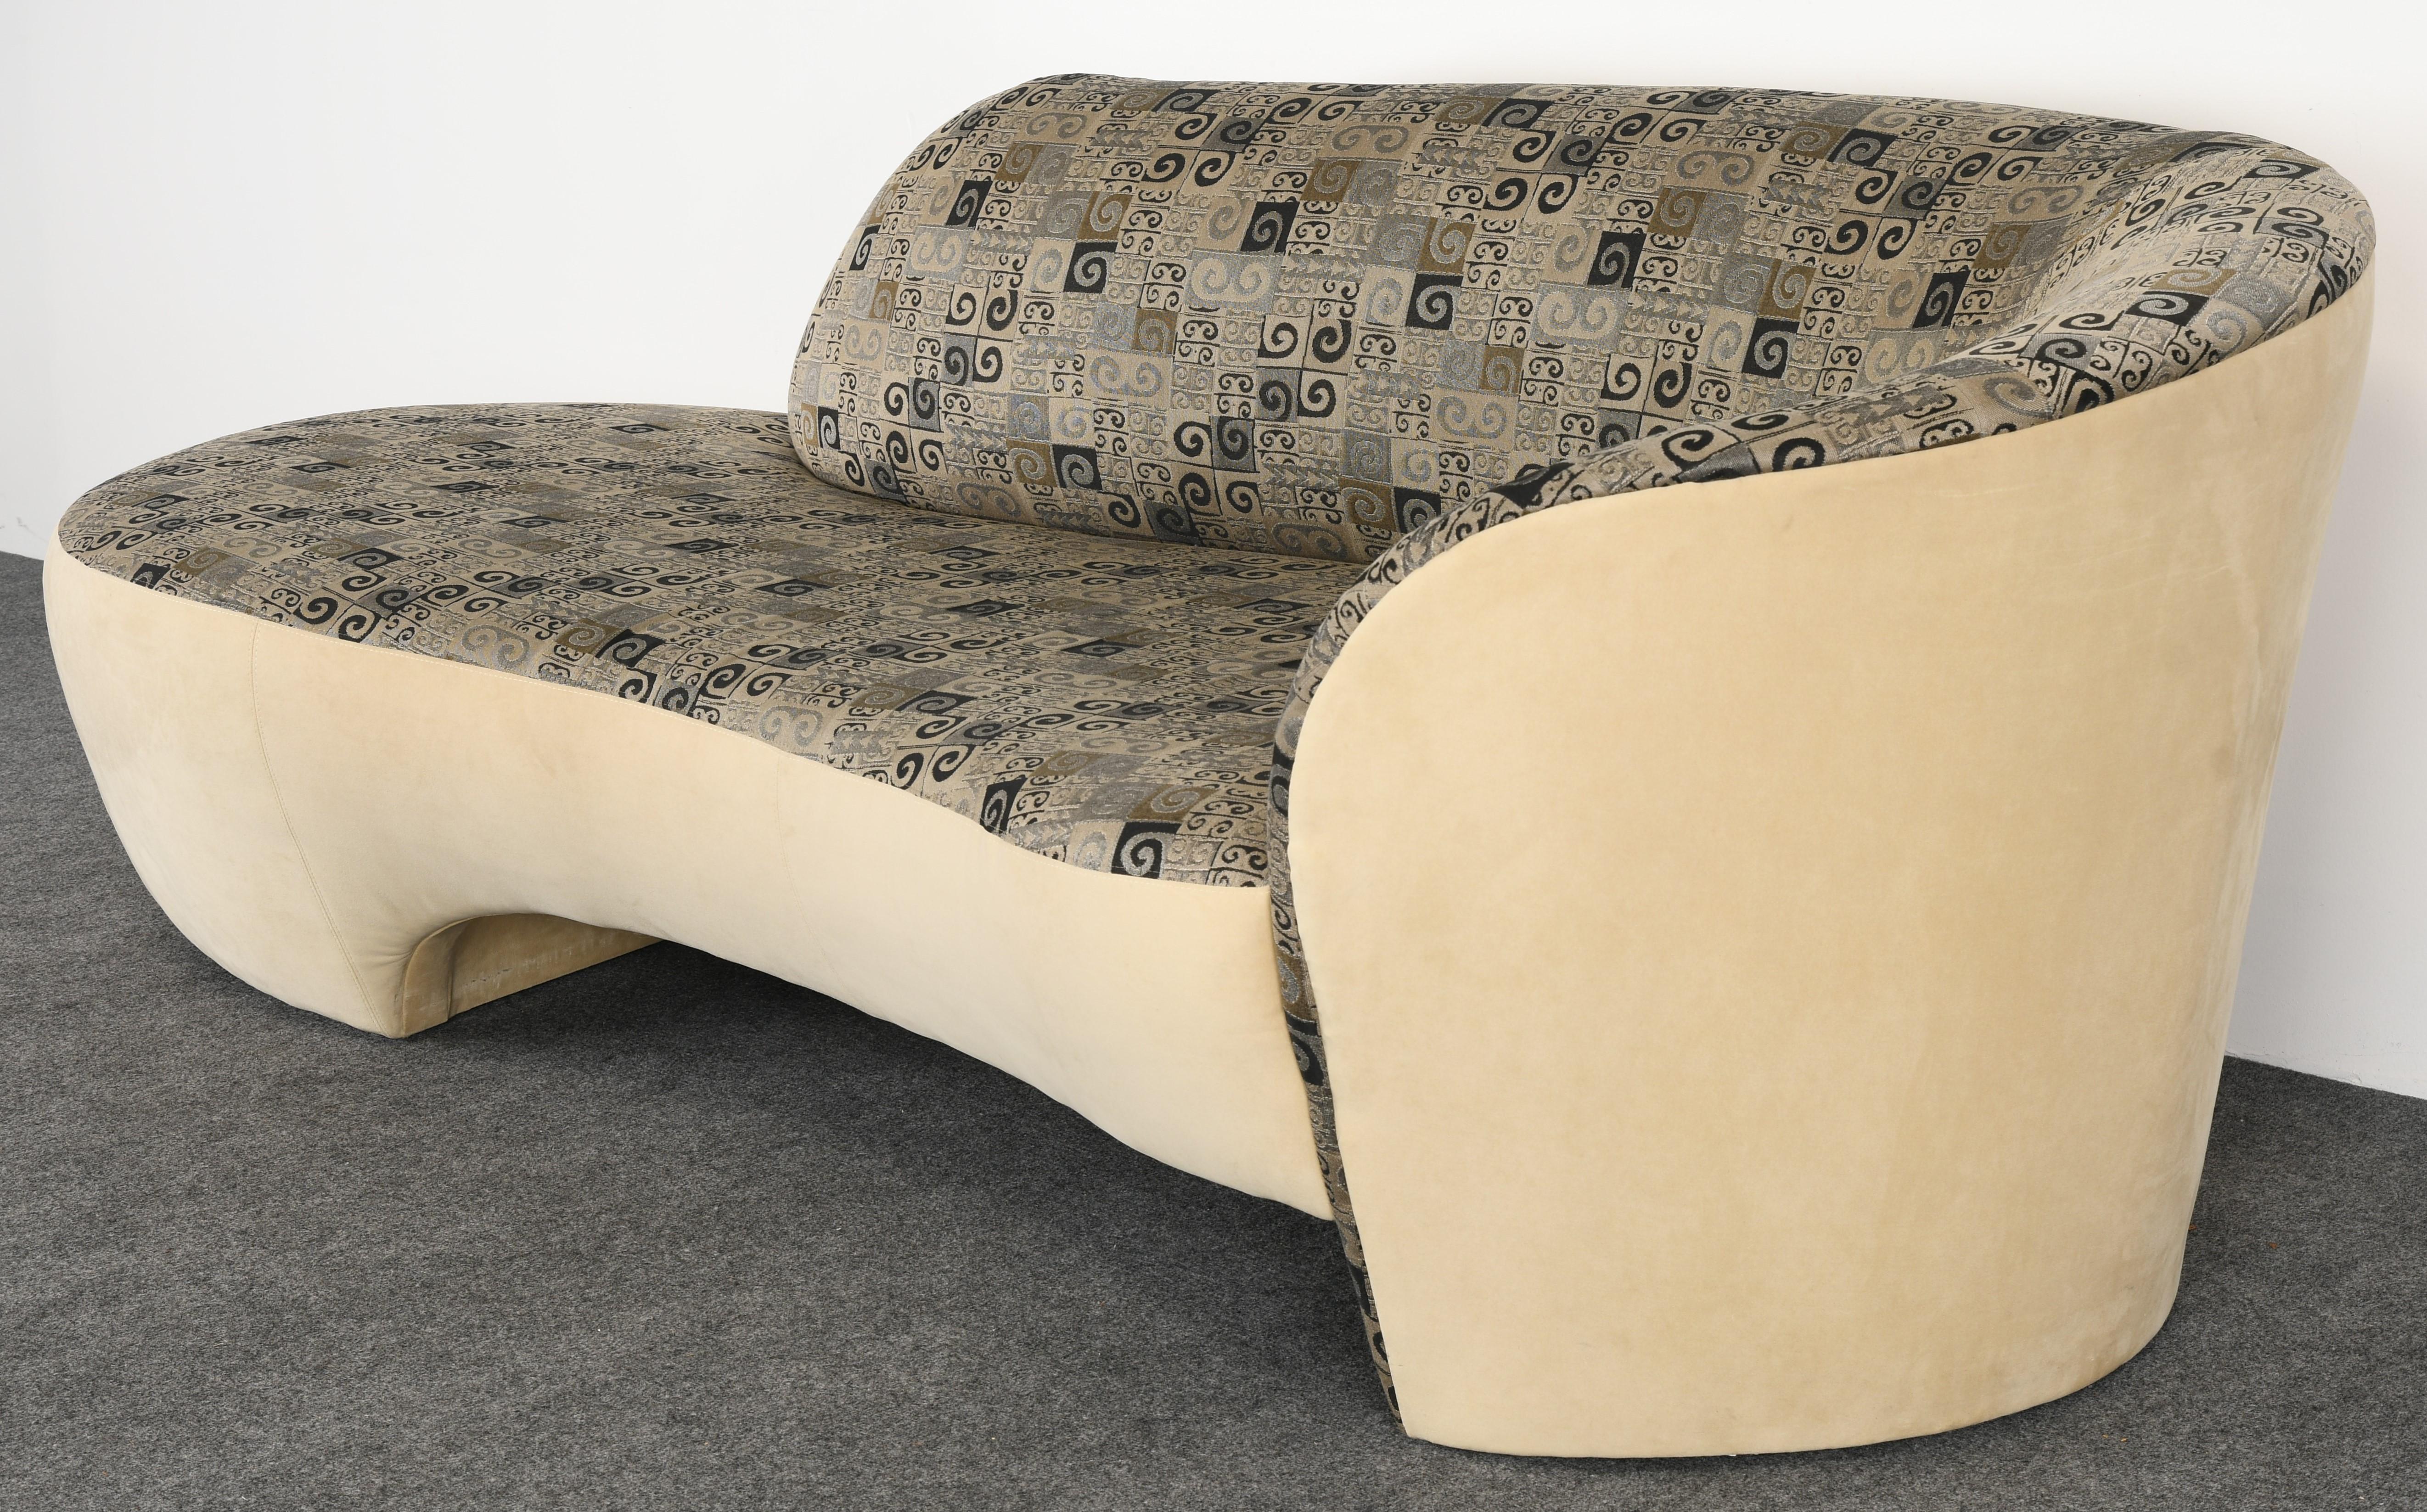 A Vladimir Kagan chaise lounge sofa for Weiman Preview. The curvaceous sofa is asymmetrical with a unique sculpted shape giving it that vintage vibe. The sofa is structurally sound and in good condition. The fabric in good vintage condition, as